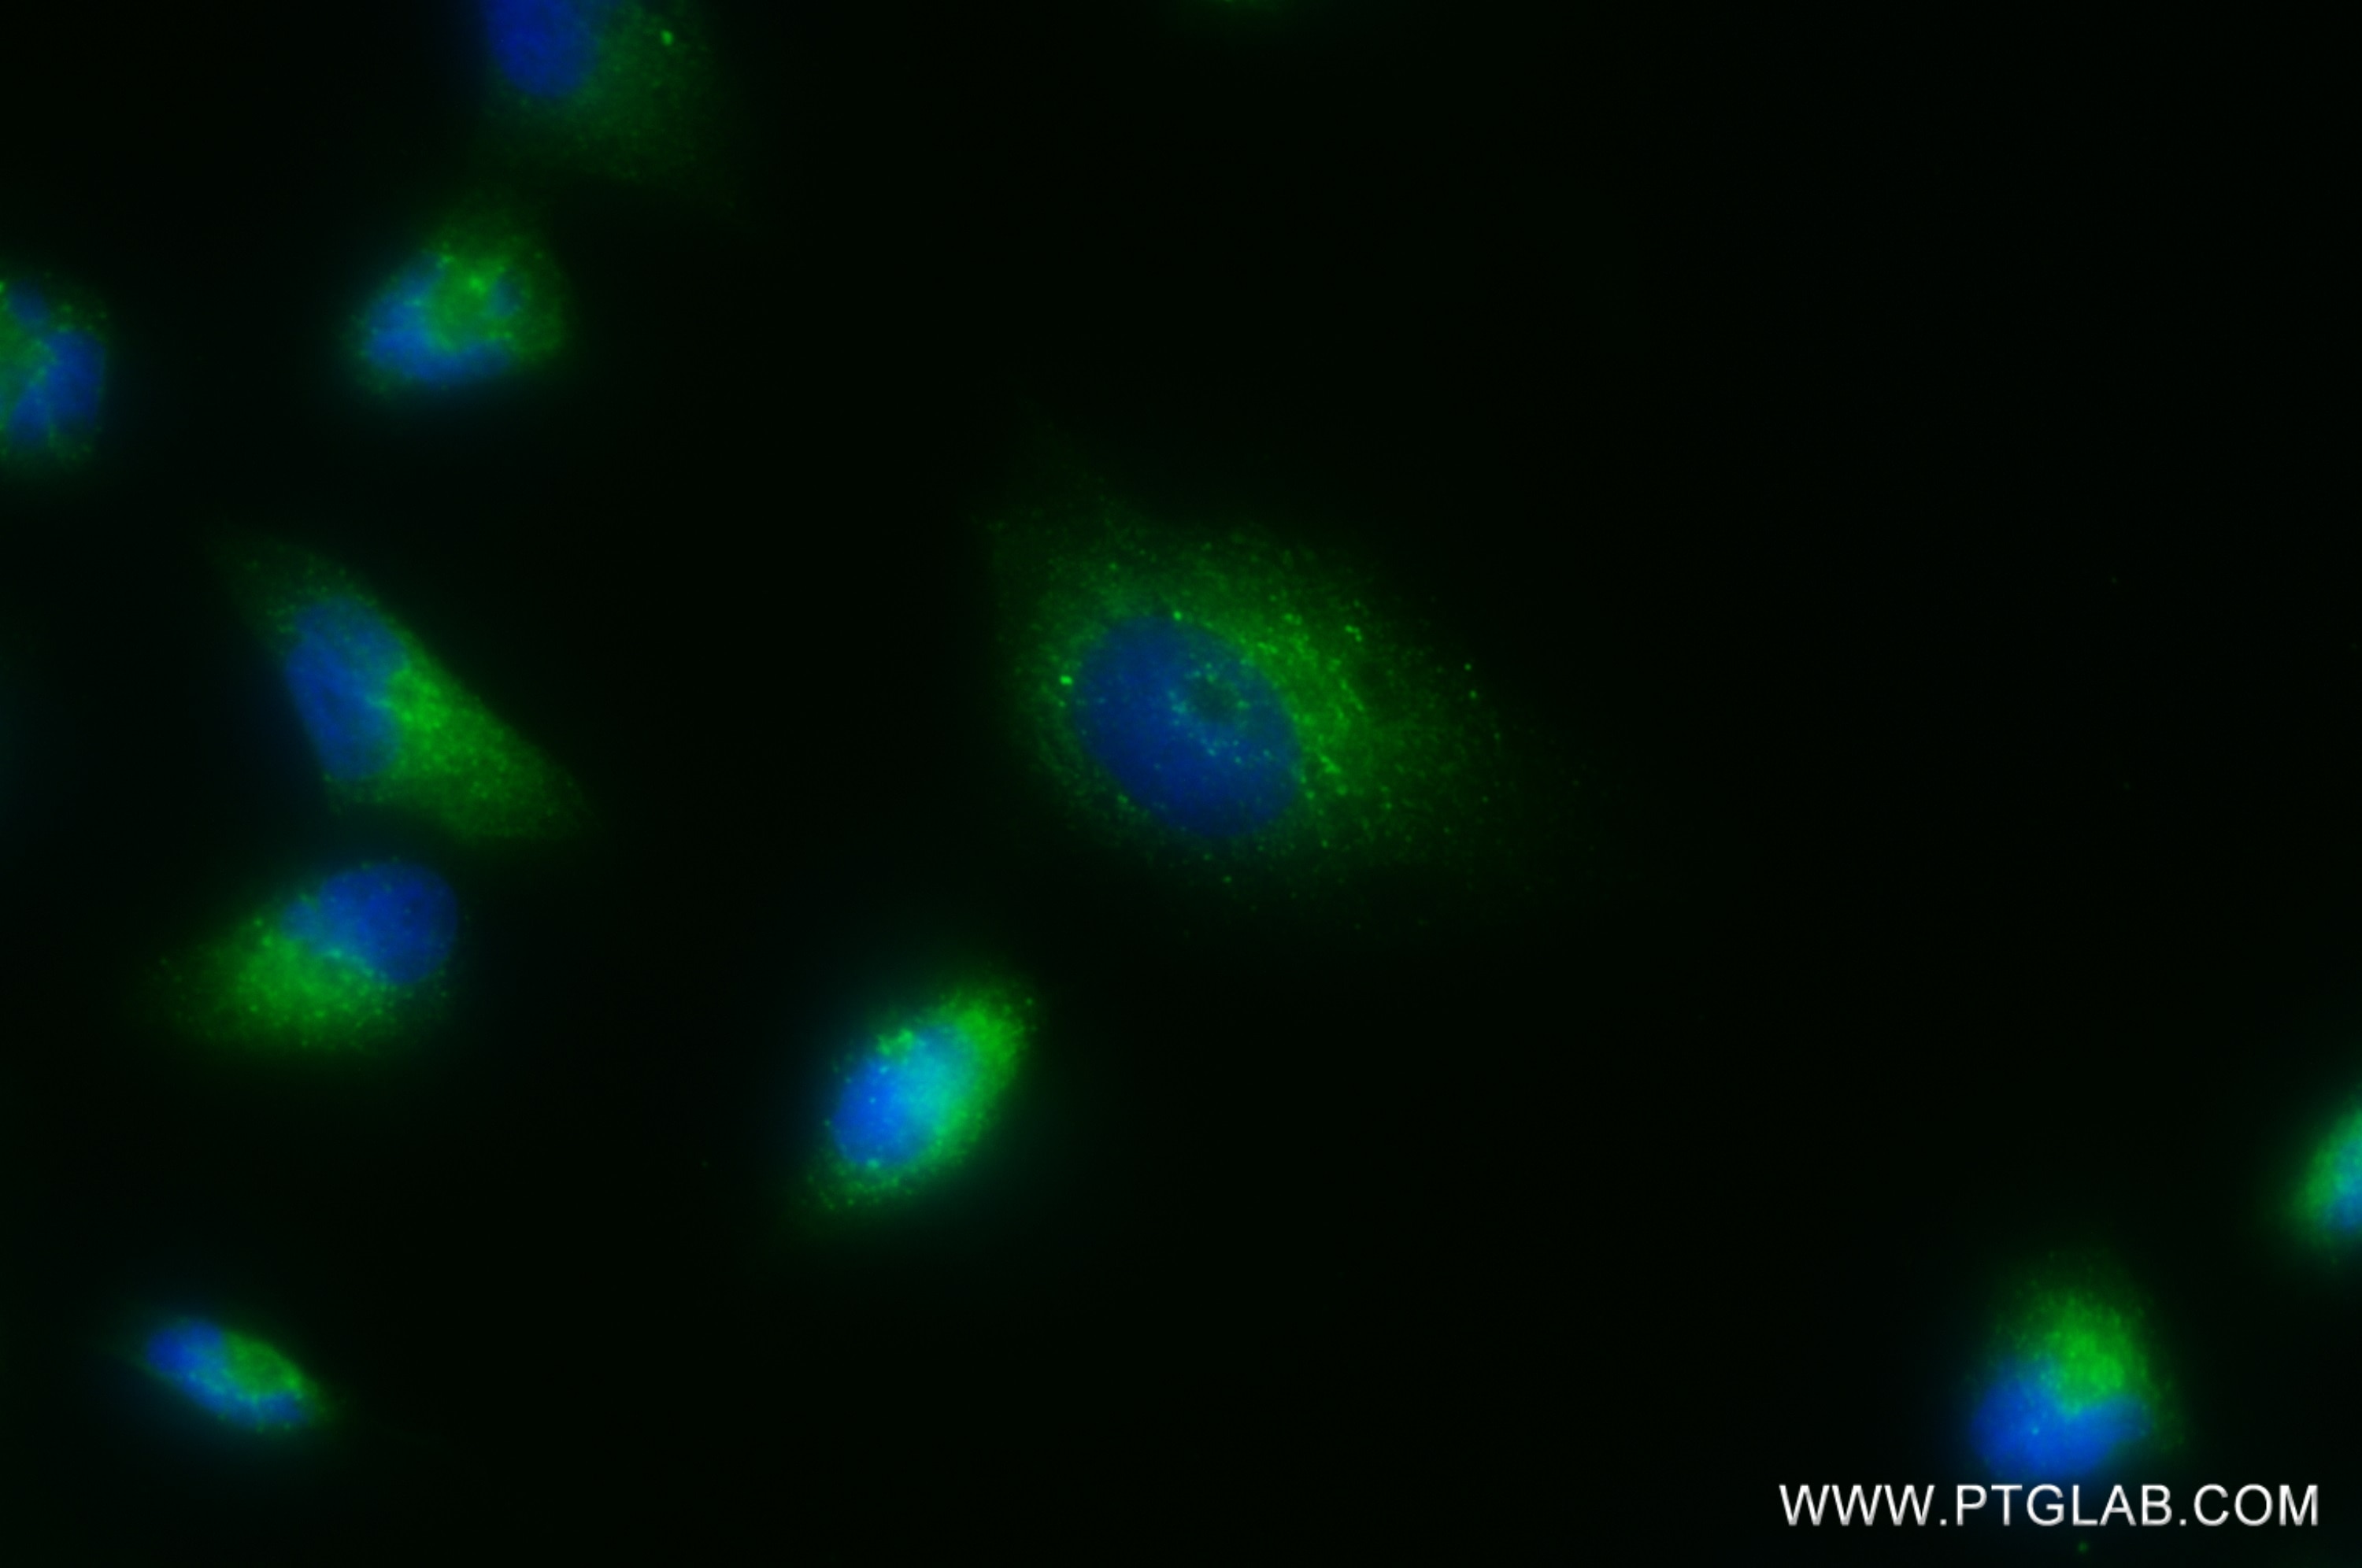 IF Staining of U-251 using 82935-1-RR